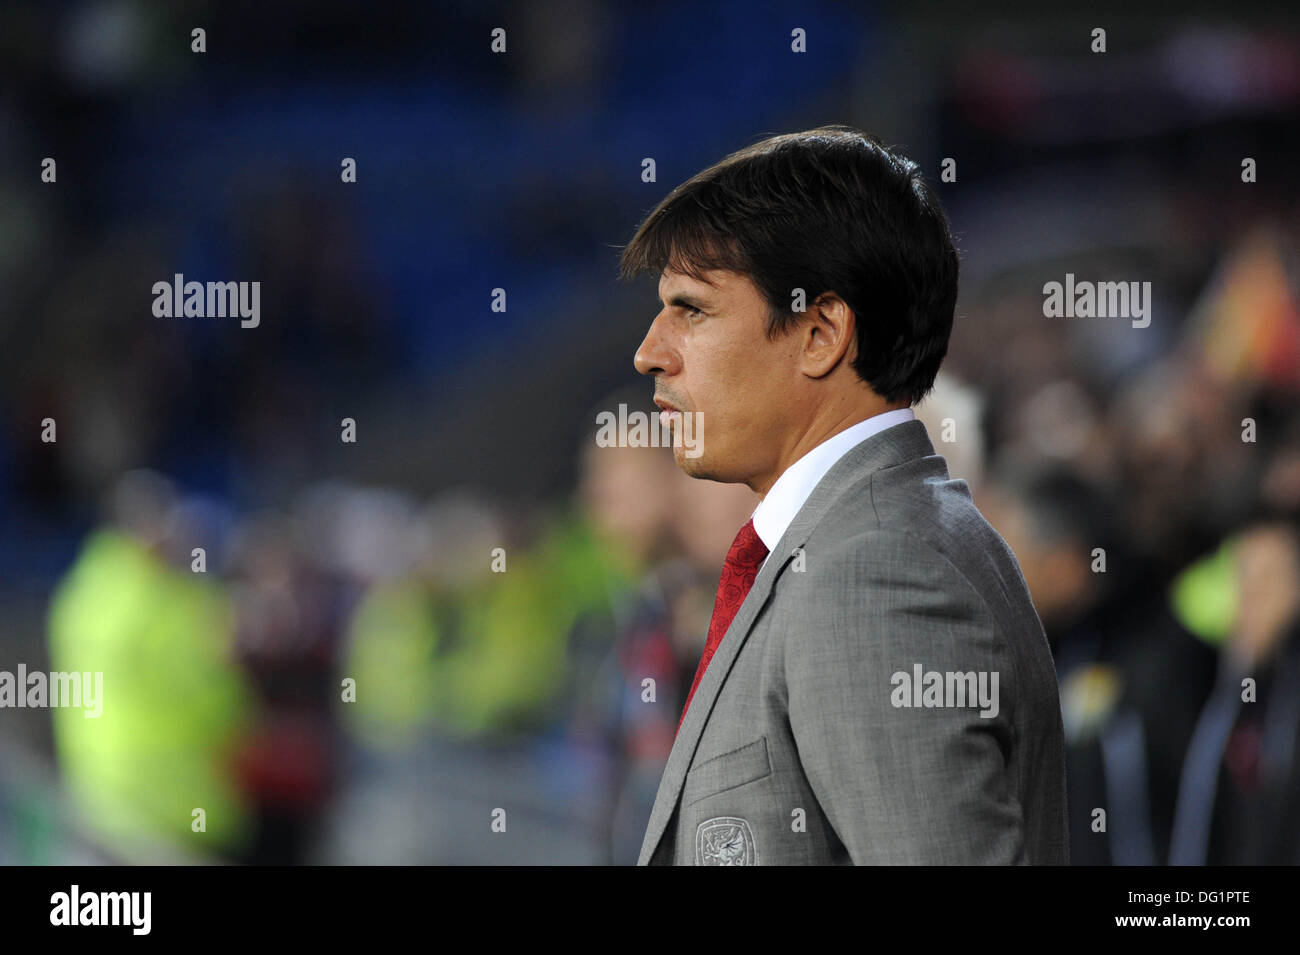 Cardiff, Wales, UK. 11th Oct, 2013. FIFA 2014 World Cup Qualifying Match - Wales v Macedonia at the Cardiff City Stadium : Wales Manager Chris Coleman before kick off. Credit:  Phil Rees/Alamy Live News Stock Photo